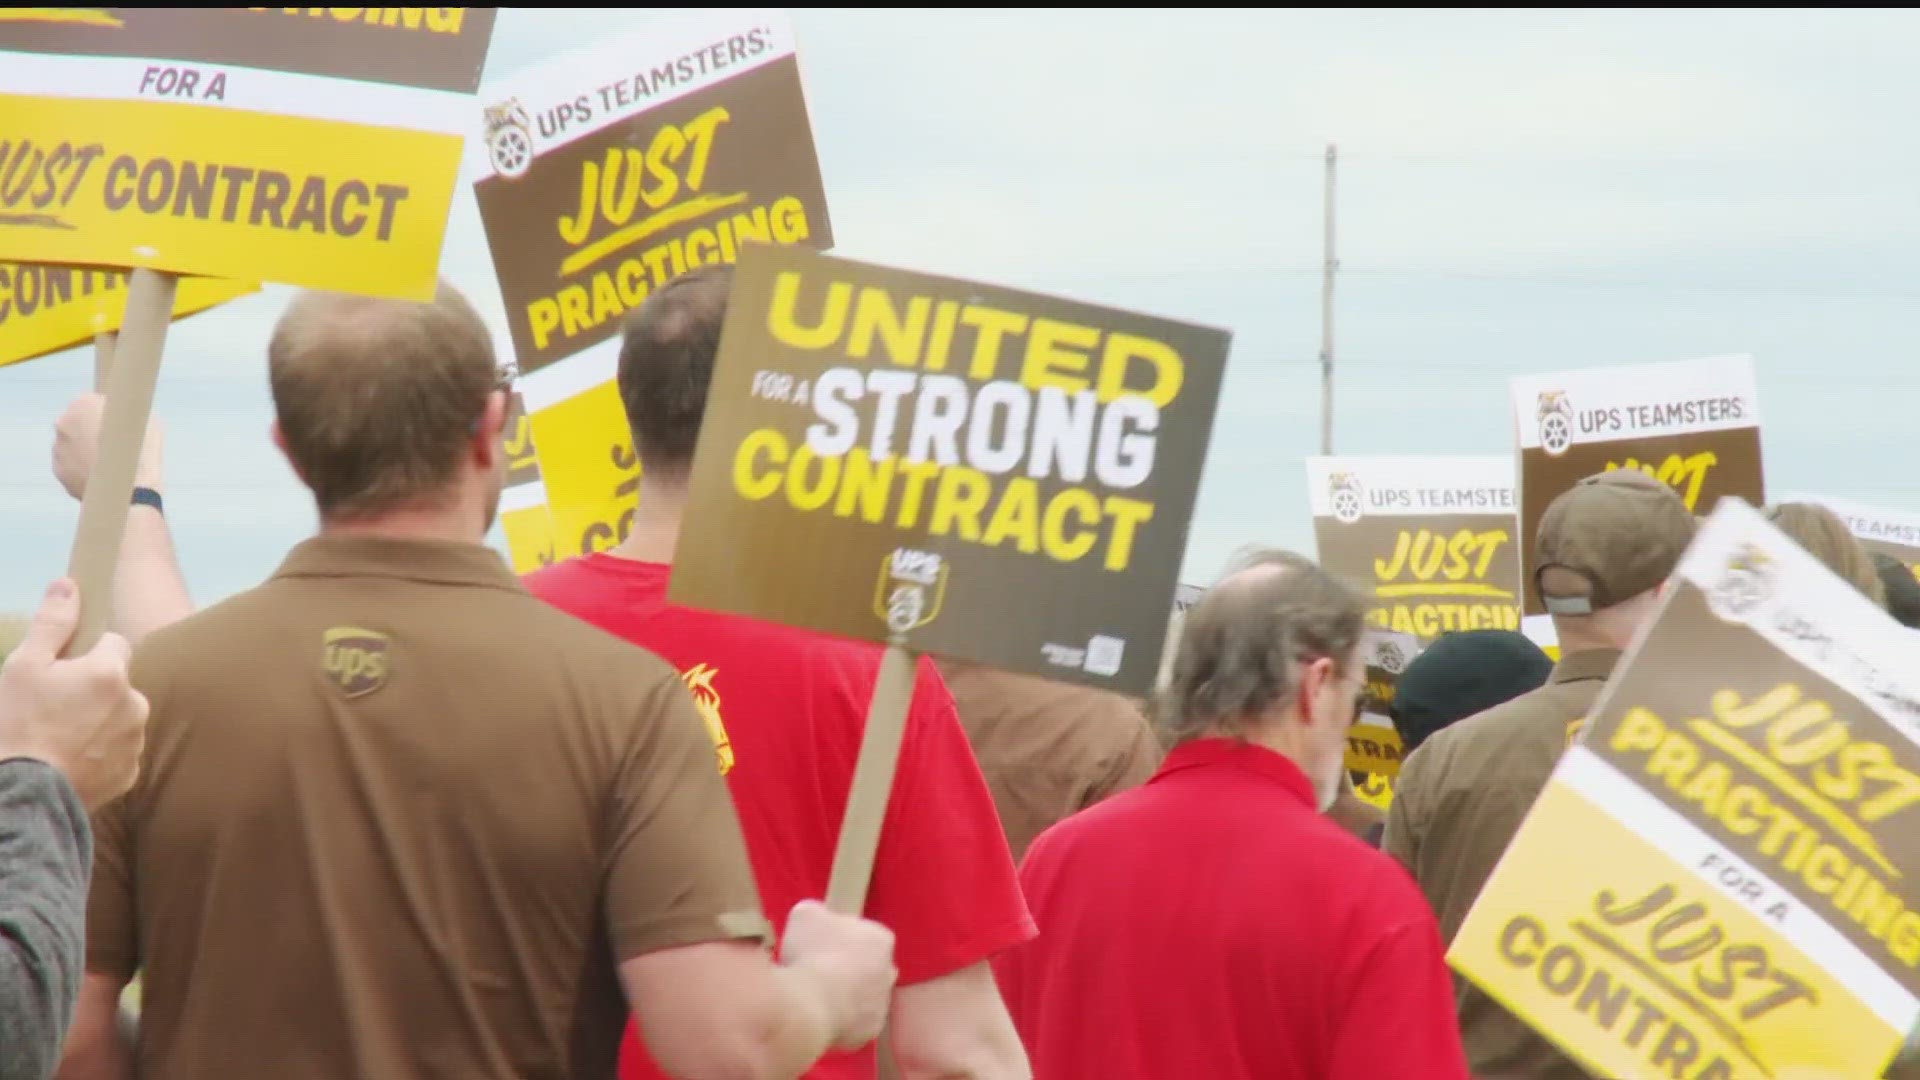 Negotiations have been underway since April and if no deal is reached, 340,000 employees will strike. There are 4,500 of them in Minnesota.